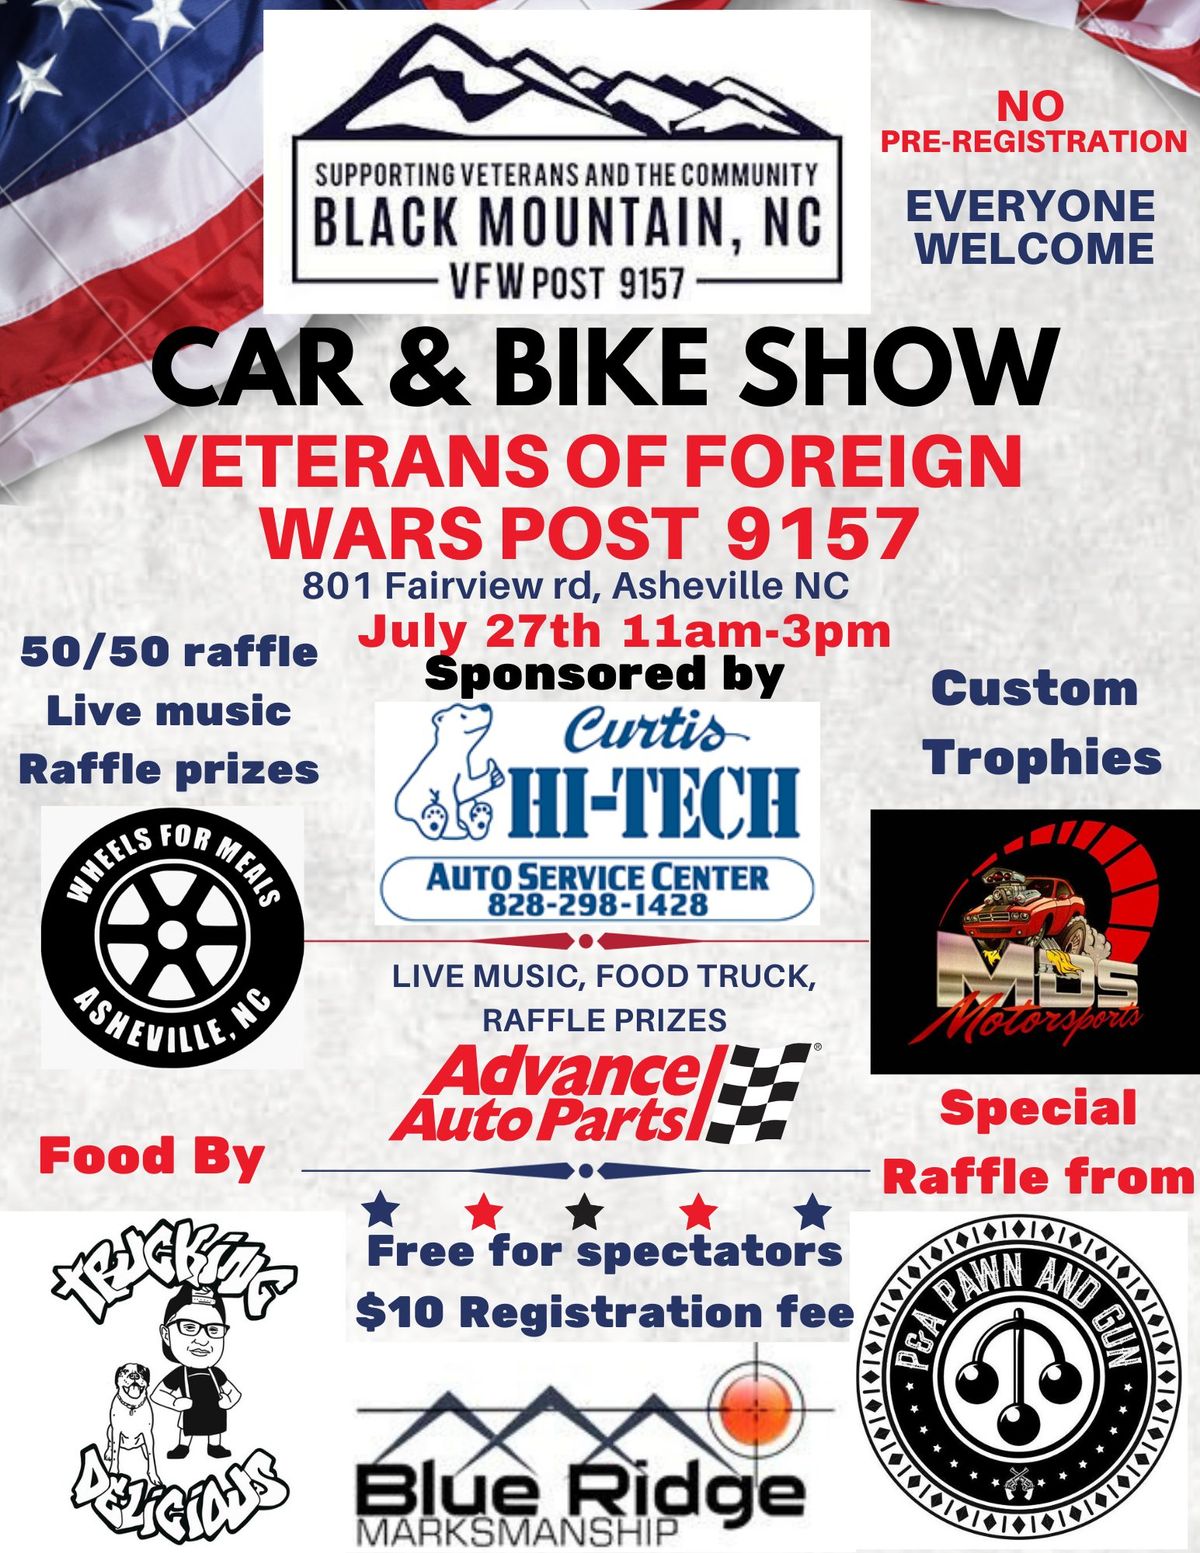 Car & Bike Show to support Local Combat Veterans